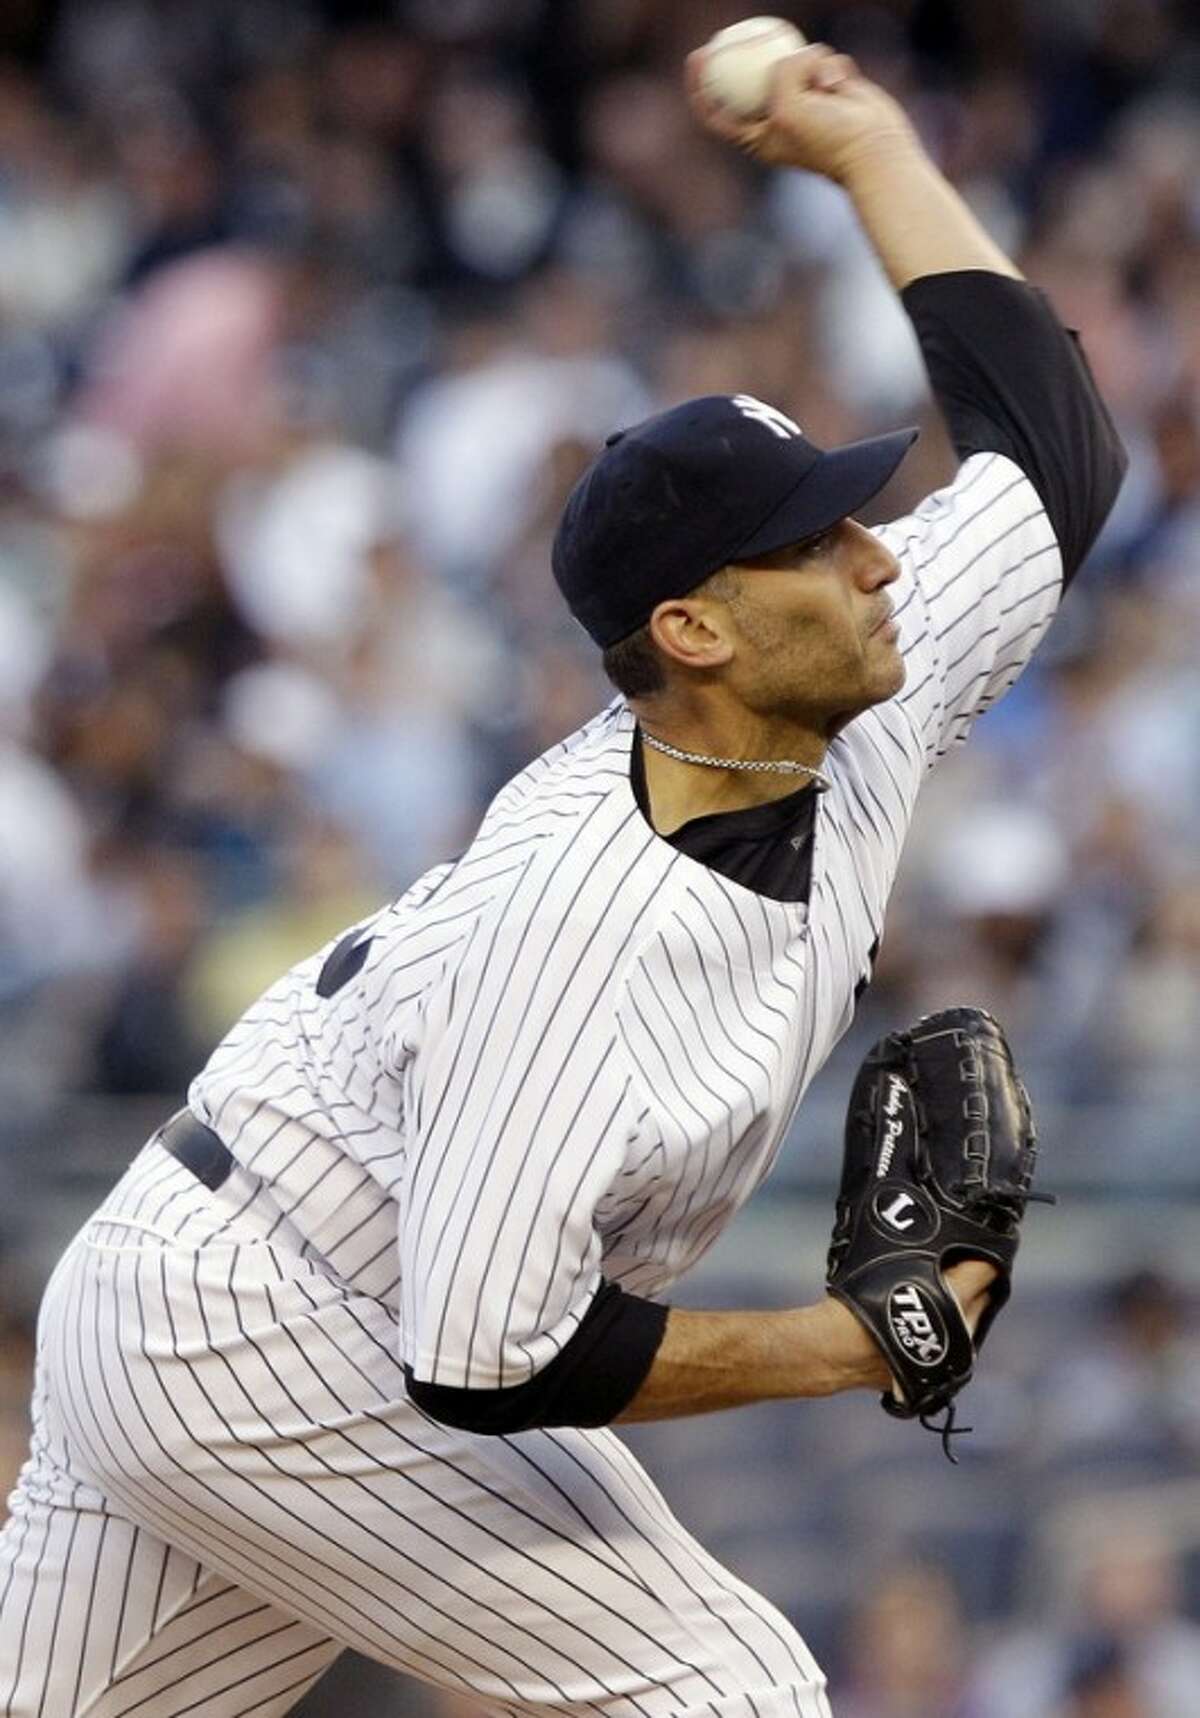 New York Yankees' Andy Pettitte delivers a pitch during the first inning of an interleague baseball game against the Cincinnati Reds, Friday, May 18, 2012, in New York. (AP Photo/Frank Franklin II)